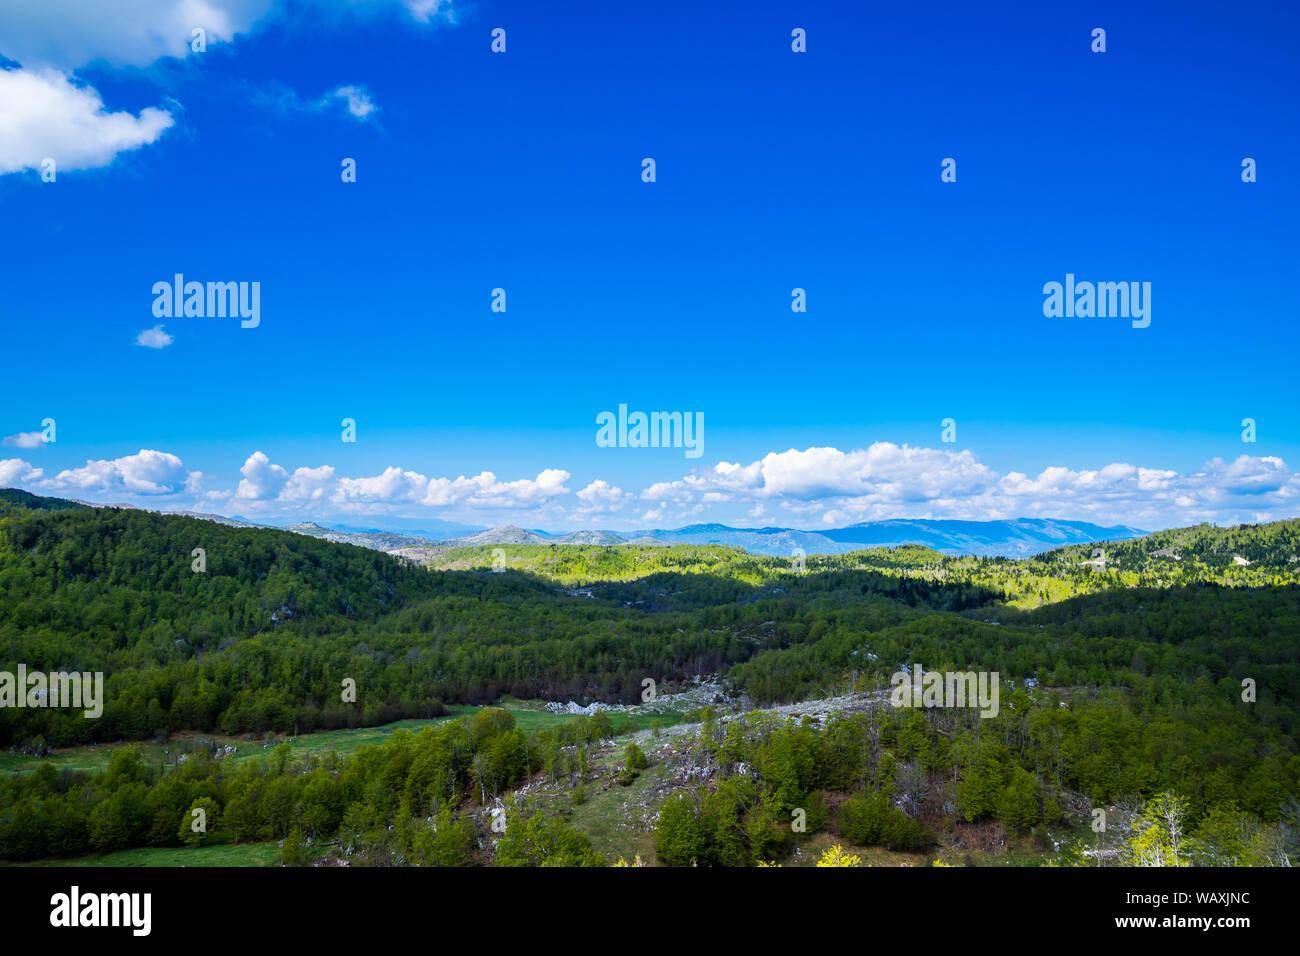 Montenegro, Green wideness of nature landscape full of green trees covering hilly and rocky country scenery near savnik in springtime with blue sky Stock Photo